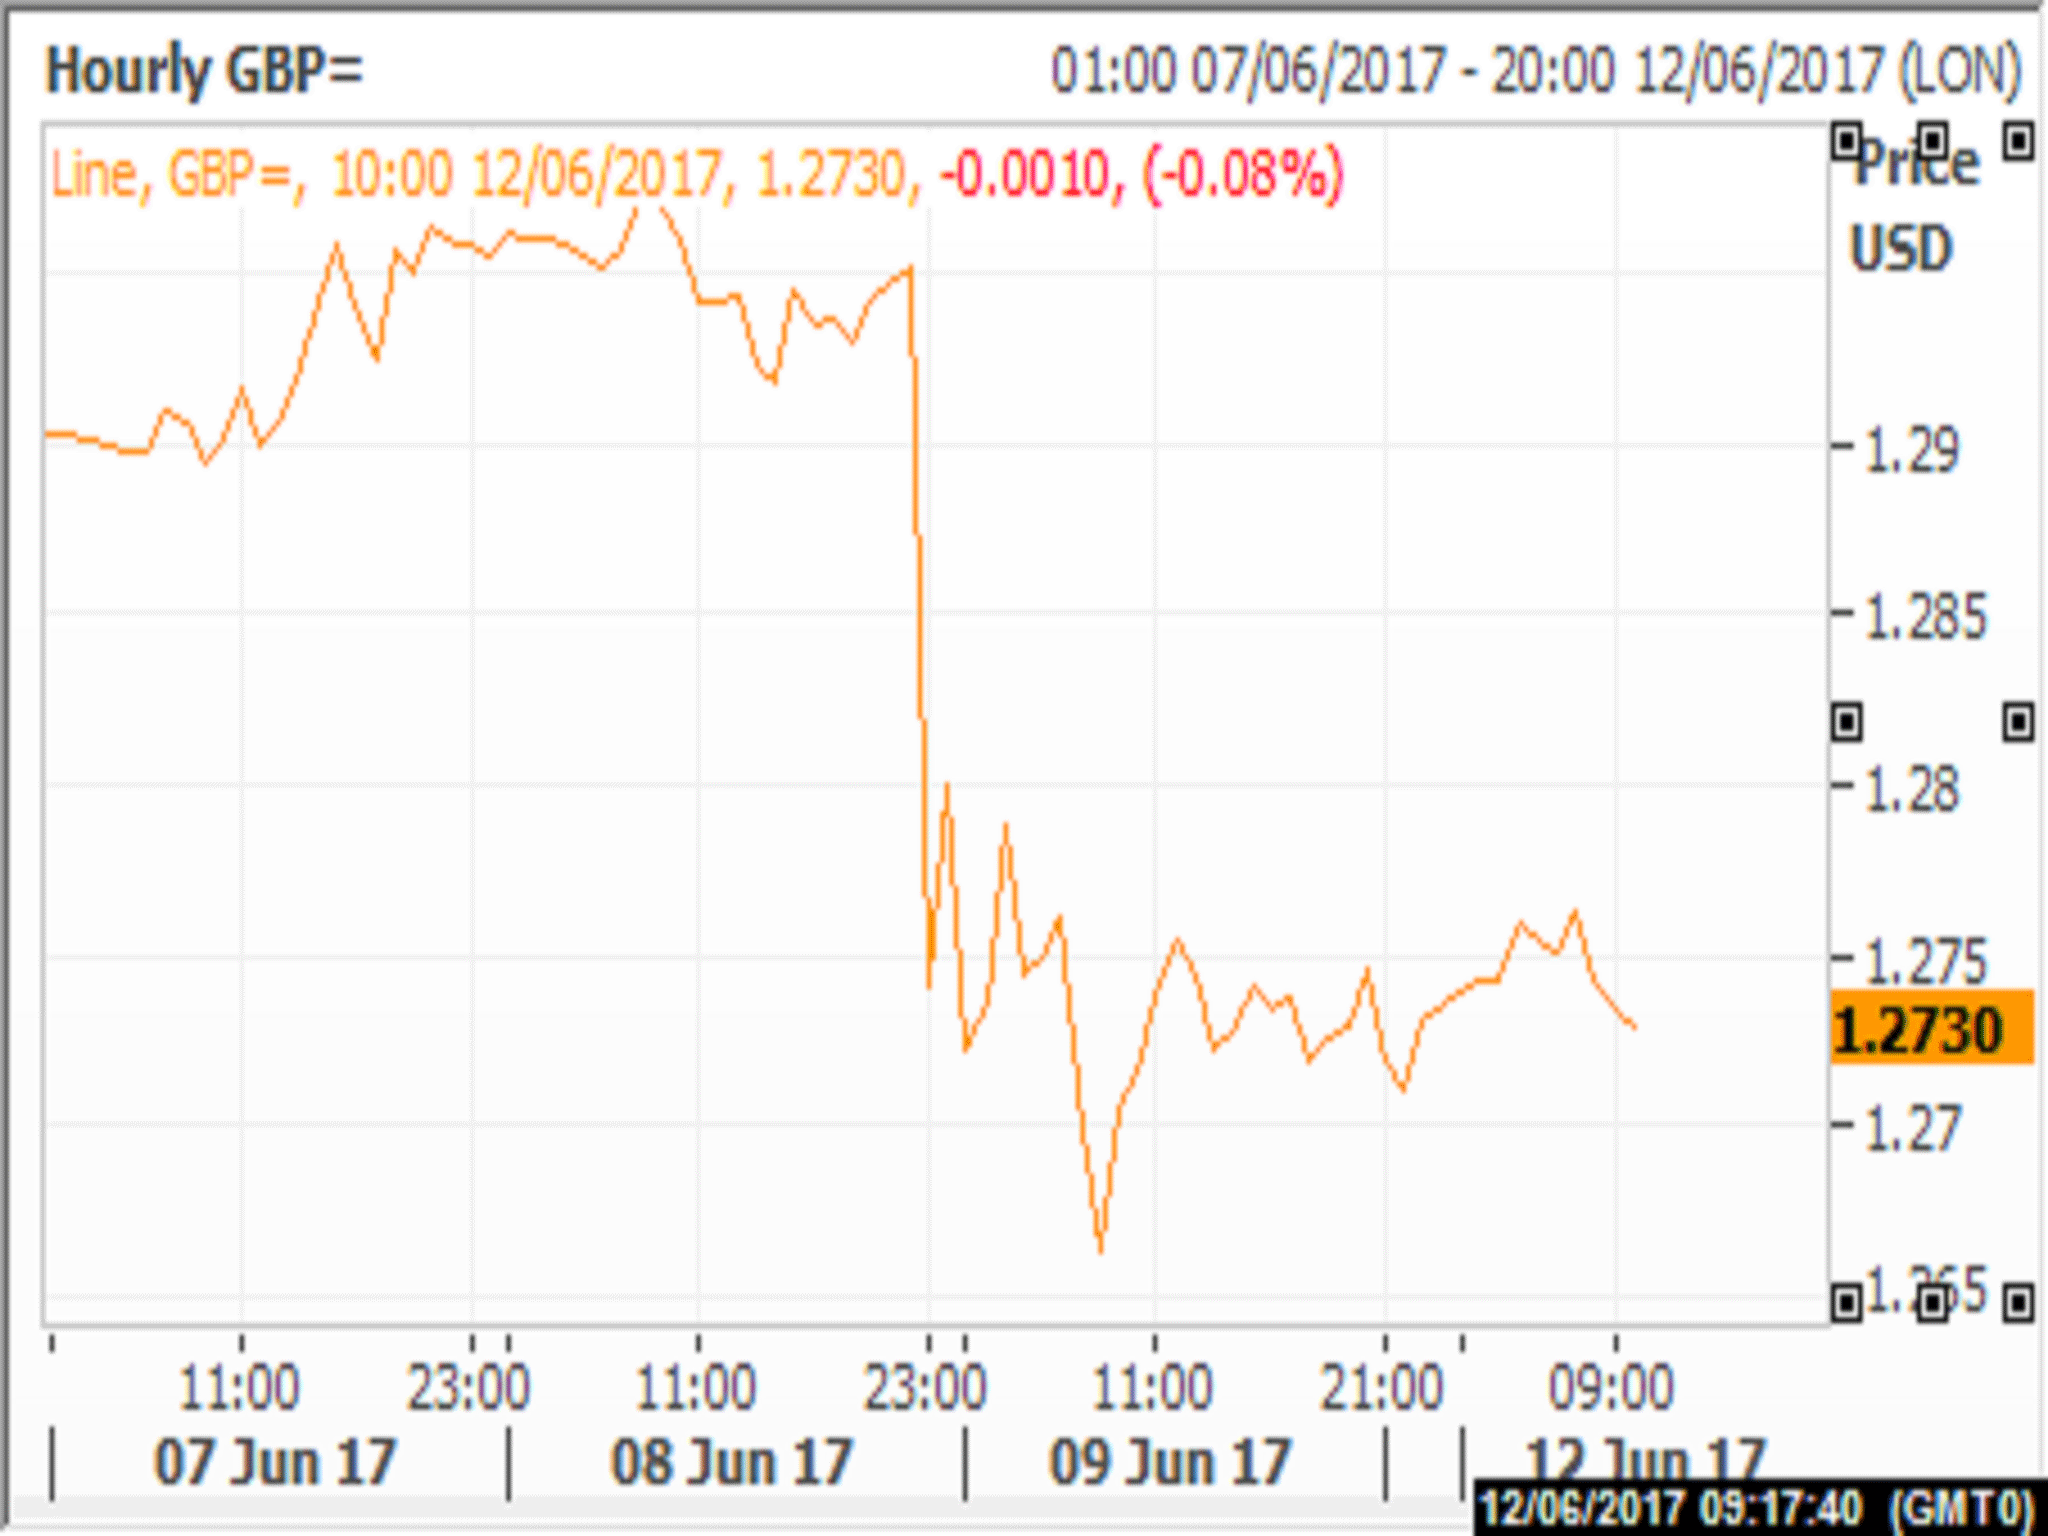 Pound sterling slips again after last week's post-election slump